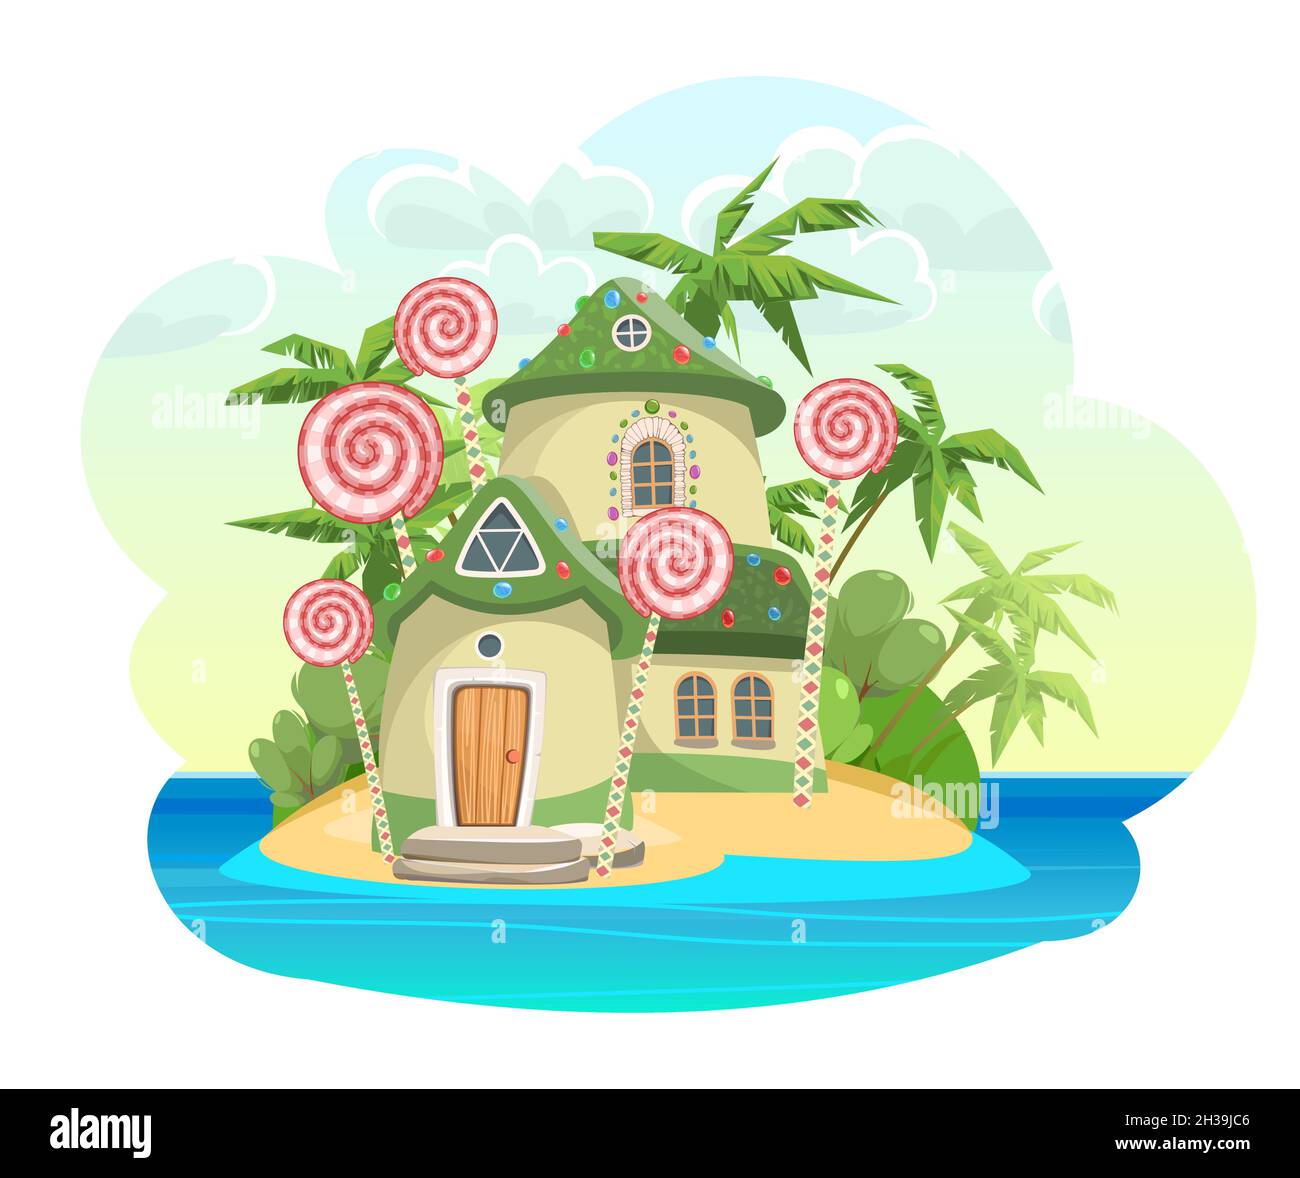 Honey life. Sweet caramel fairy house on tropical island. Illustration in cartoon style flat design. Summer cute landscape. Picture for children Stock Vector